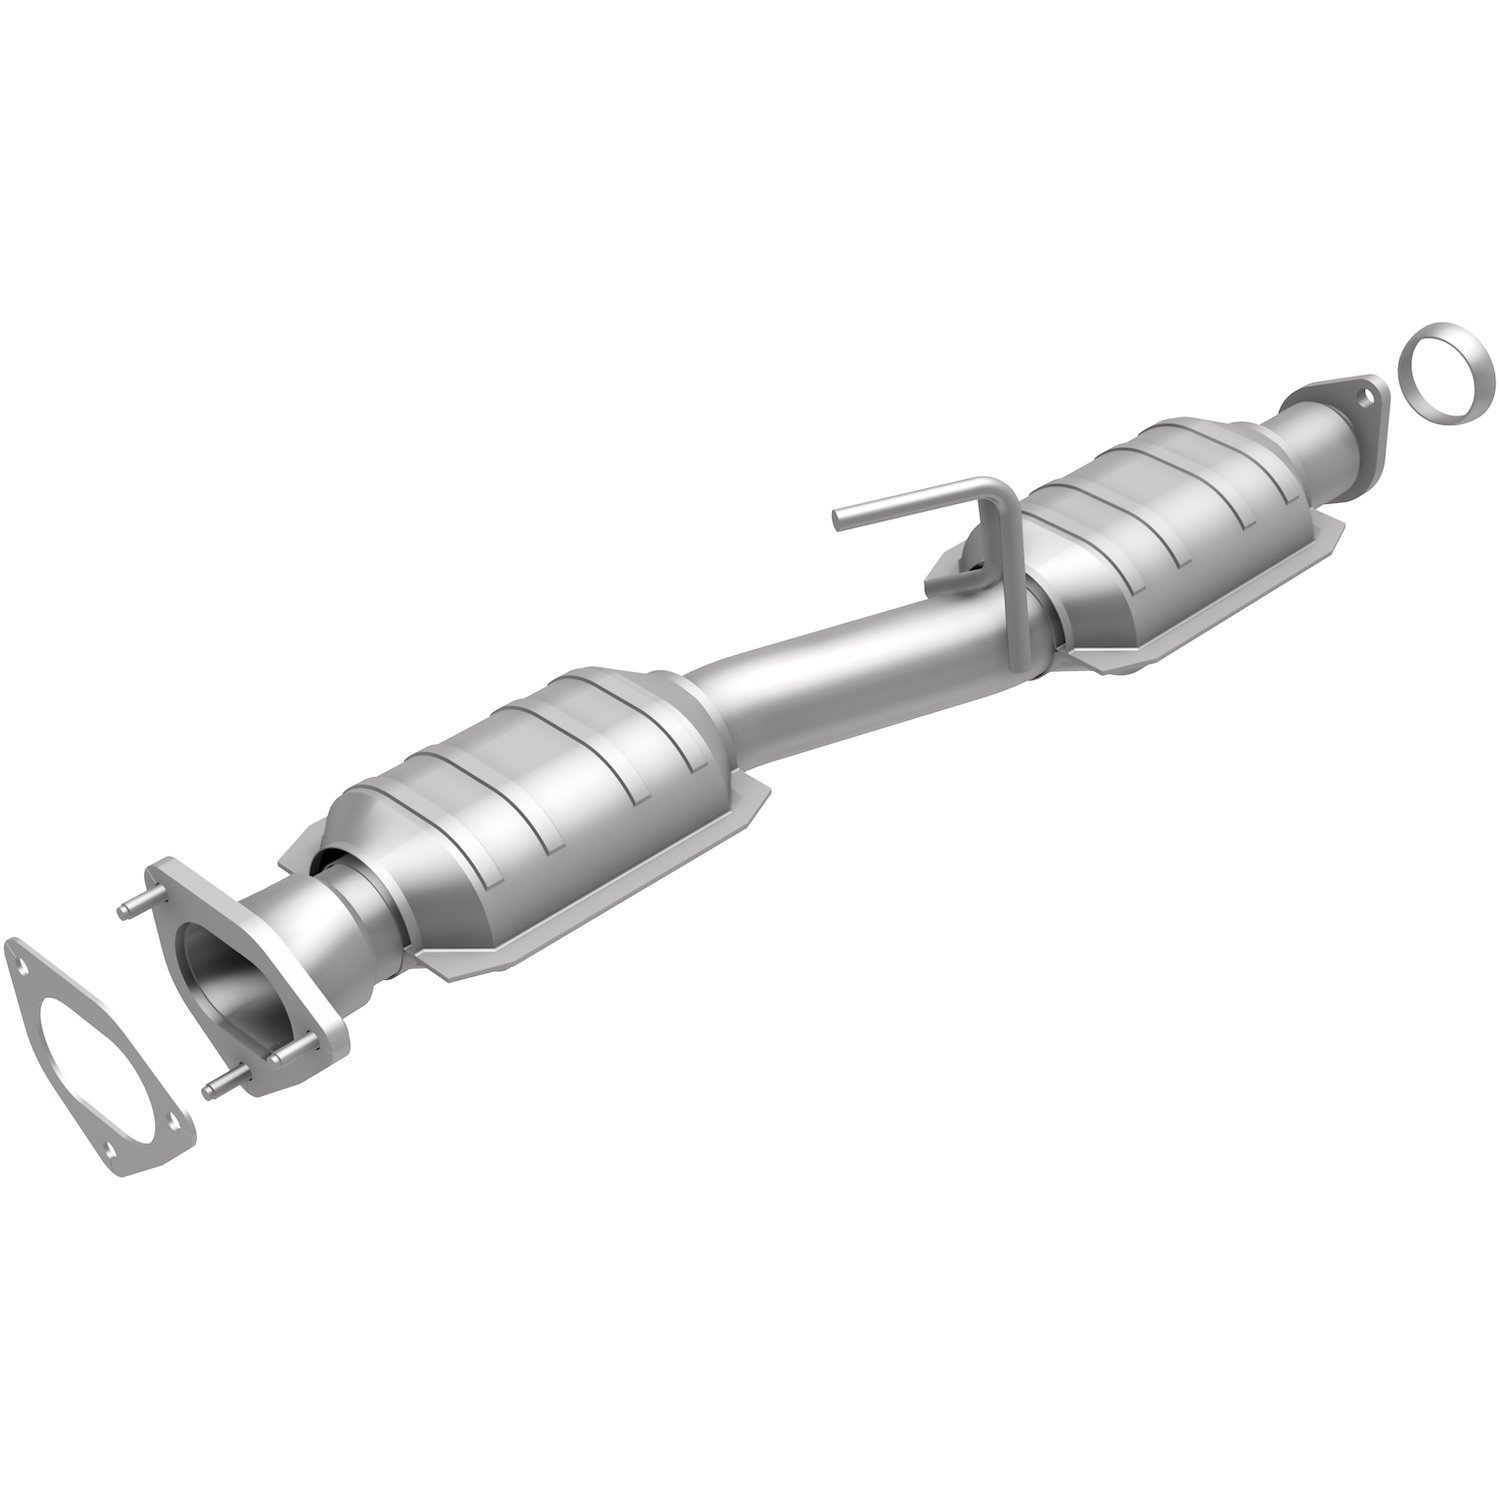 1996-1998 Ford Explorer California Grade CARB Compliant Direct-Fit Catalytic Converter